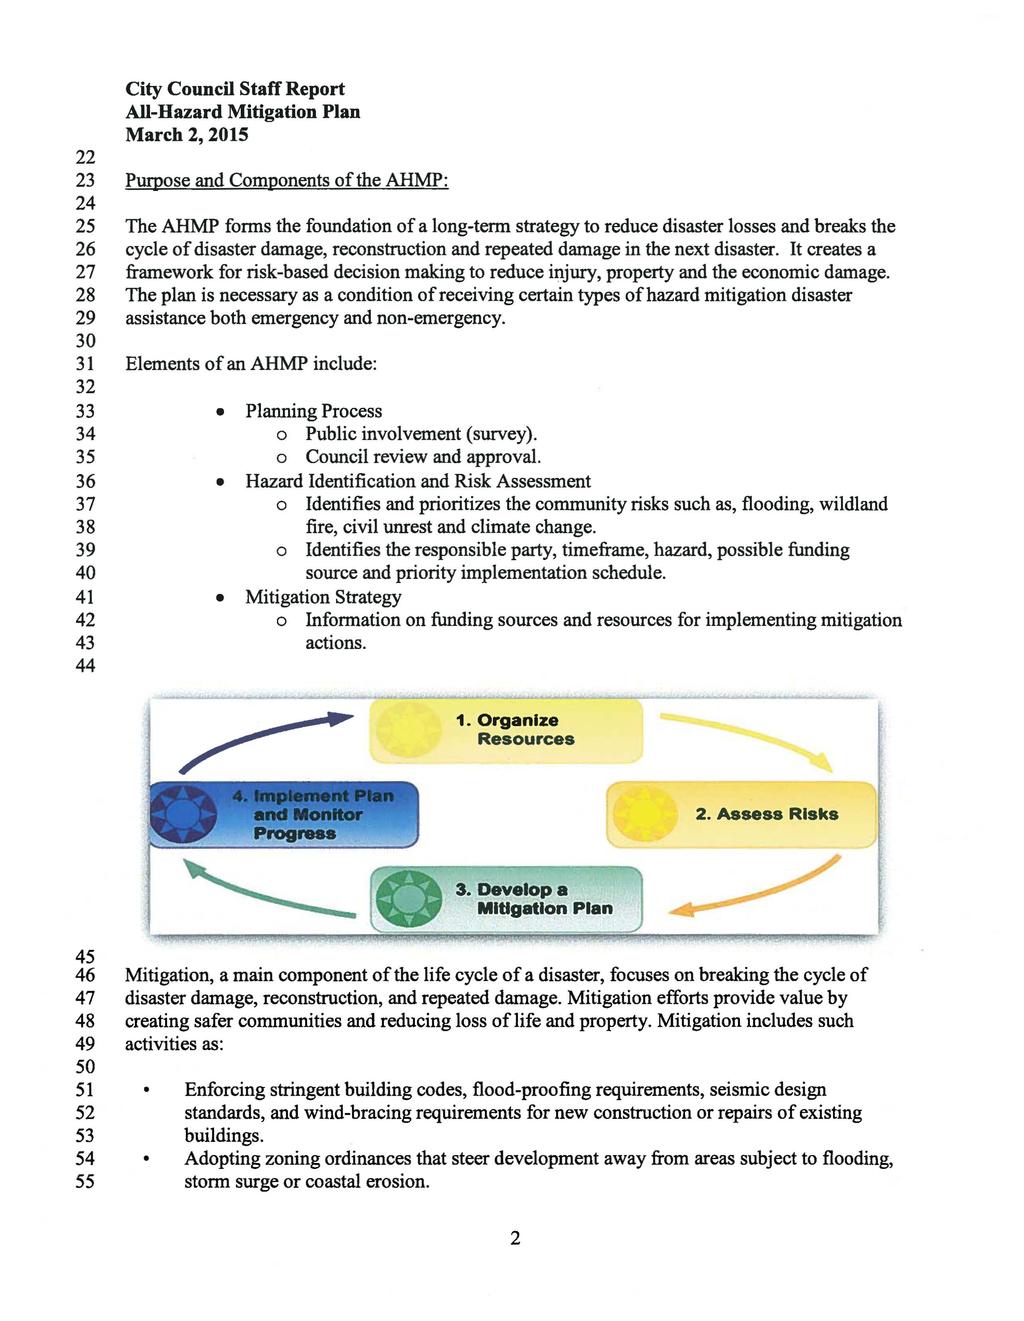 City Council Staff Report 22 23 Purpose and Components ofthe AHMP: 24 25 The AHMP forms the foundation ofa long-term strategy to reduce disaster losses and breaks the 26 cycle ofdisaster damage,